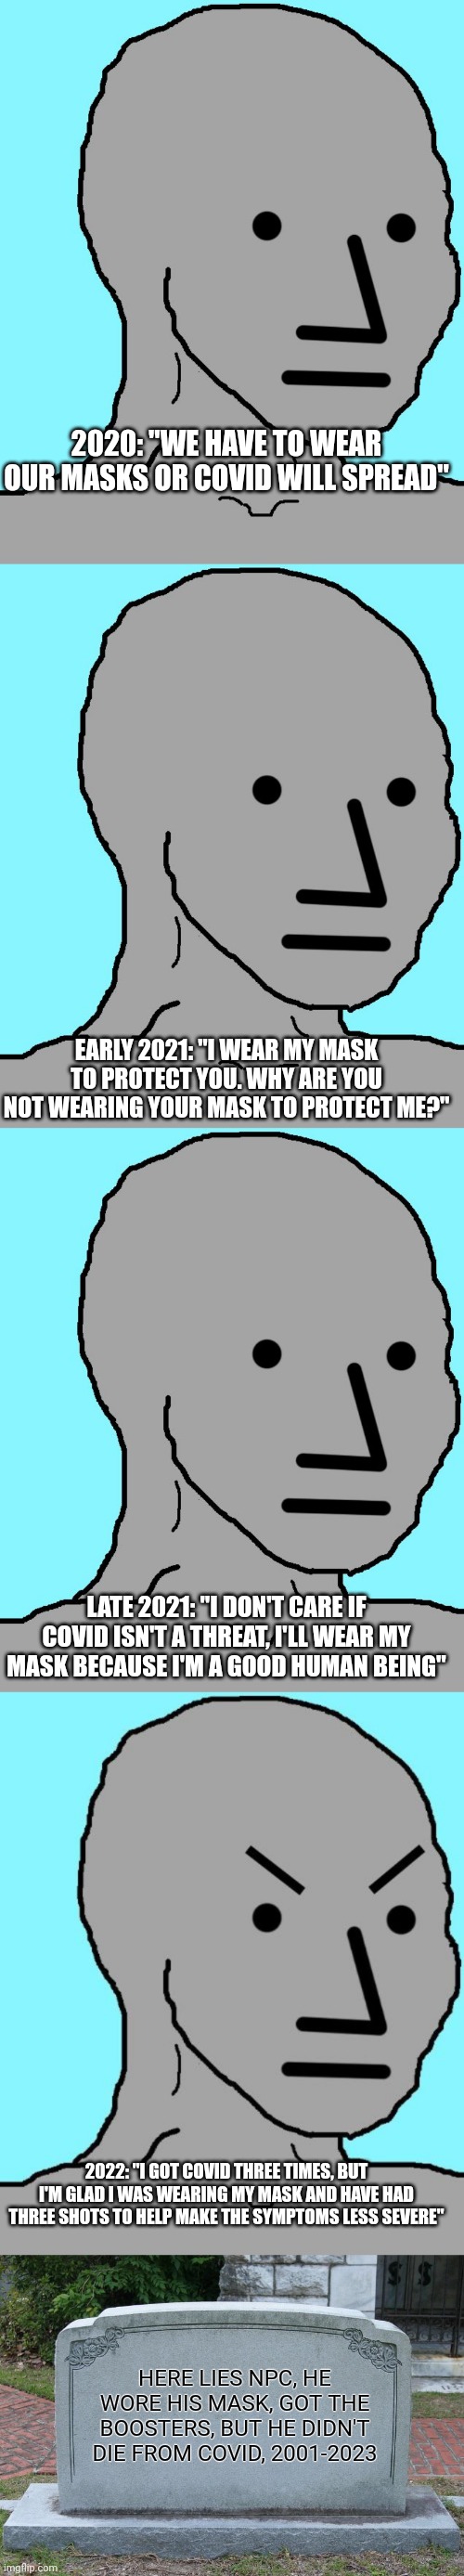 R.I.P. NPC, you lived a short life, but at least you were boot licking till the very end. | 2020: "WE HAVE TO WEAR OUR MASKS OR COVID WILL SPREAD"; EARLY 2021: "I WEAR MY MASK TO PROTECT YOU. WHY ARE YOU NOT WEARING YOUR MASK TO PROTECT ME?"; LATE 2021: "I DON'T CARE IF COVID ISN'T A THREAT, I'LL WEAR MY MASK BECAUSE I'M A GOOD HUMAN BEING"; 2022: "I GOT COVID THREE TIMES, BUT I'M GLAD I WAS WEARING MY MASK AND HAVE HAD THREE SHOTS TO HELP MAKE THE SYMPTOMS LESS SEVERE"; HERE LIES NPC, HE WORE HIS MASK, GOT THE BOOSTERS, BUT HE DIDN'T DIE FROM COVID, 2001-2023 | image tagged in memes,npc,npc meme angry,gravestone | made w/ Imgflip meme maker